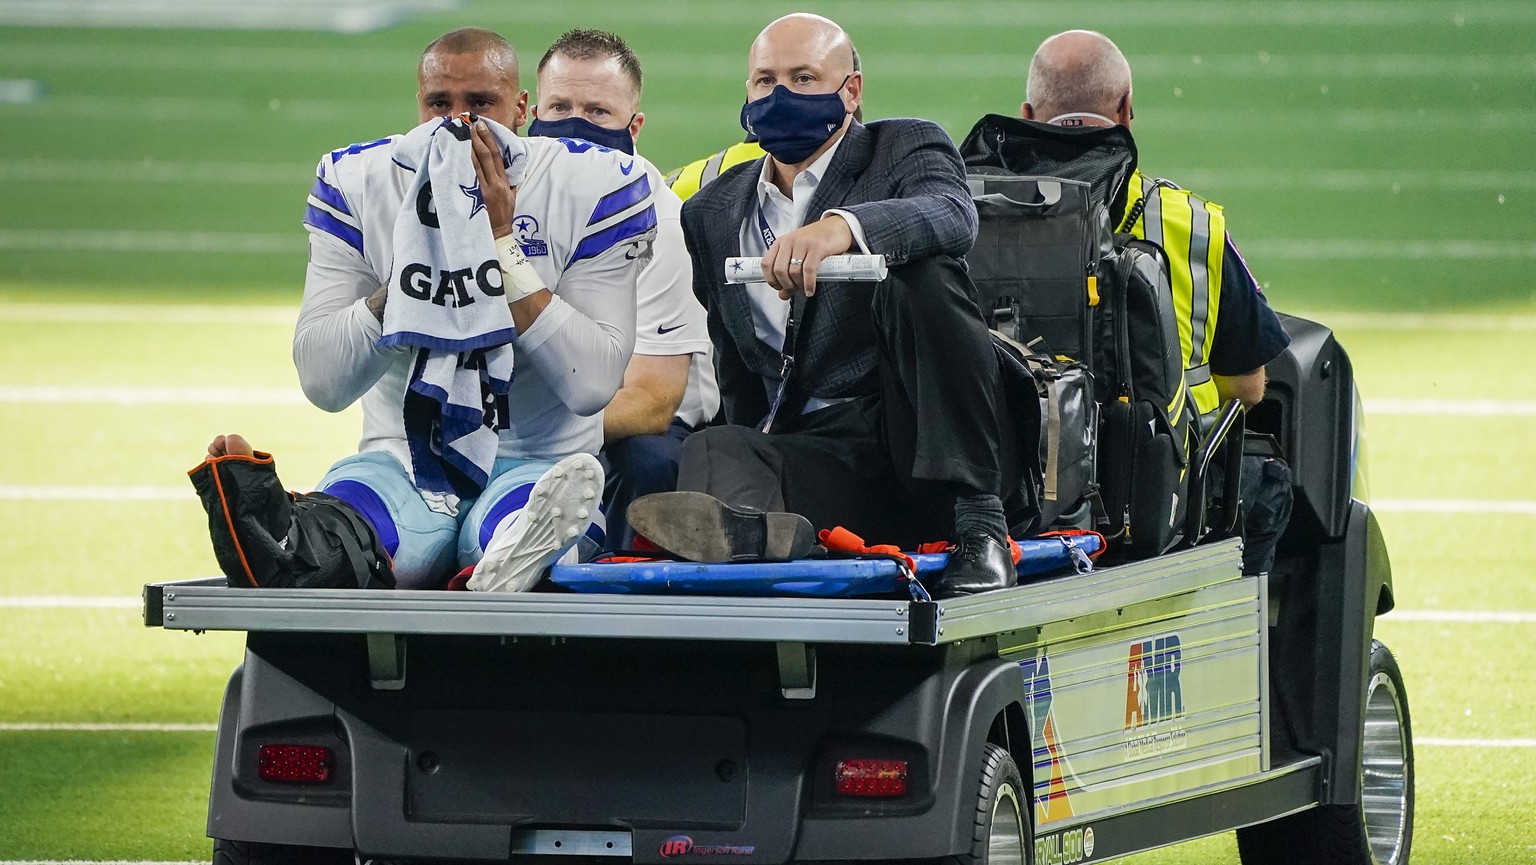 Dallas Cowboys quarterback Dak Prescott leaves the field on a cart after beig injured on a tackle by New York Giants cornerback Logan Ryan during the third quarter of an NFL football game on Sunday, O ...